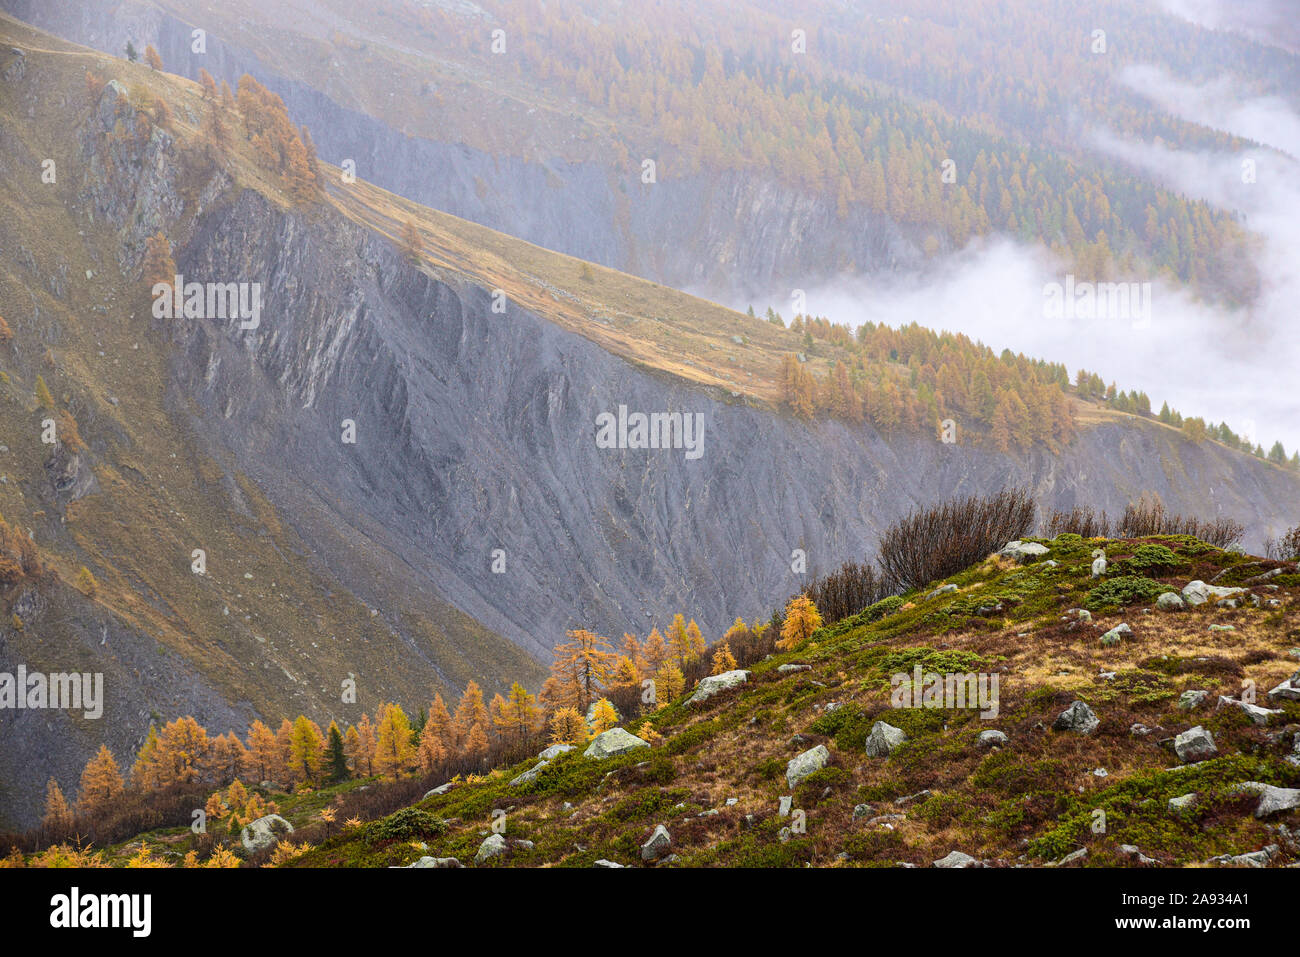 The colors of autumn in the mountains. Alps, Italy Stock Photo